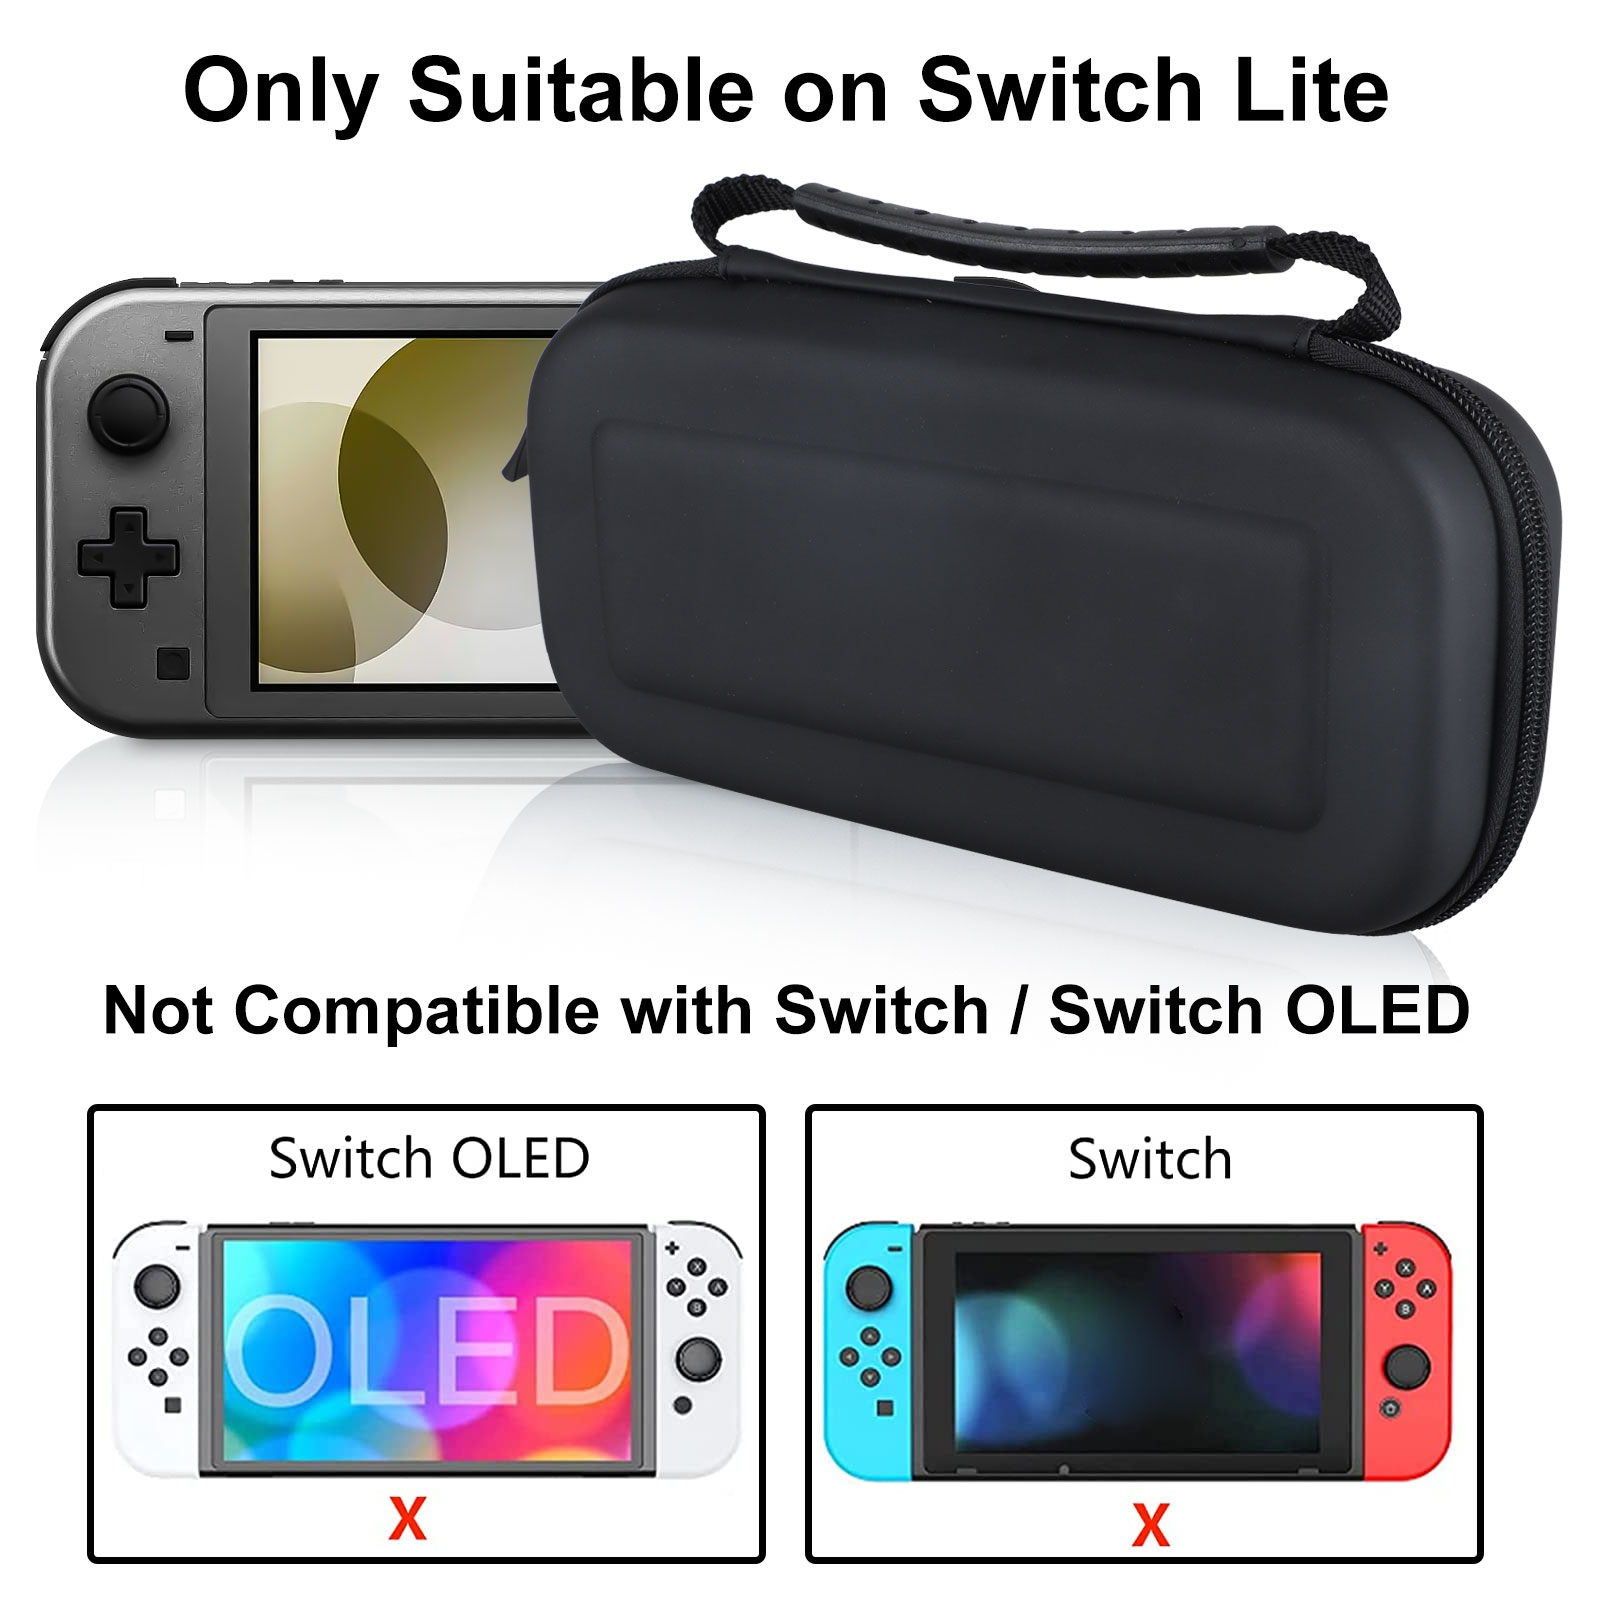 Switch Lite Accessories Bundle, EEEkit Carrying Case Fit for Nintendo Switch Lite 2019 Console with Tempered Glass Screen Protectors, Clear Case, Charging Cable, Thumbstick Cap, NS Lite Accessories - image 3 of 9